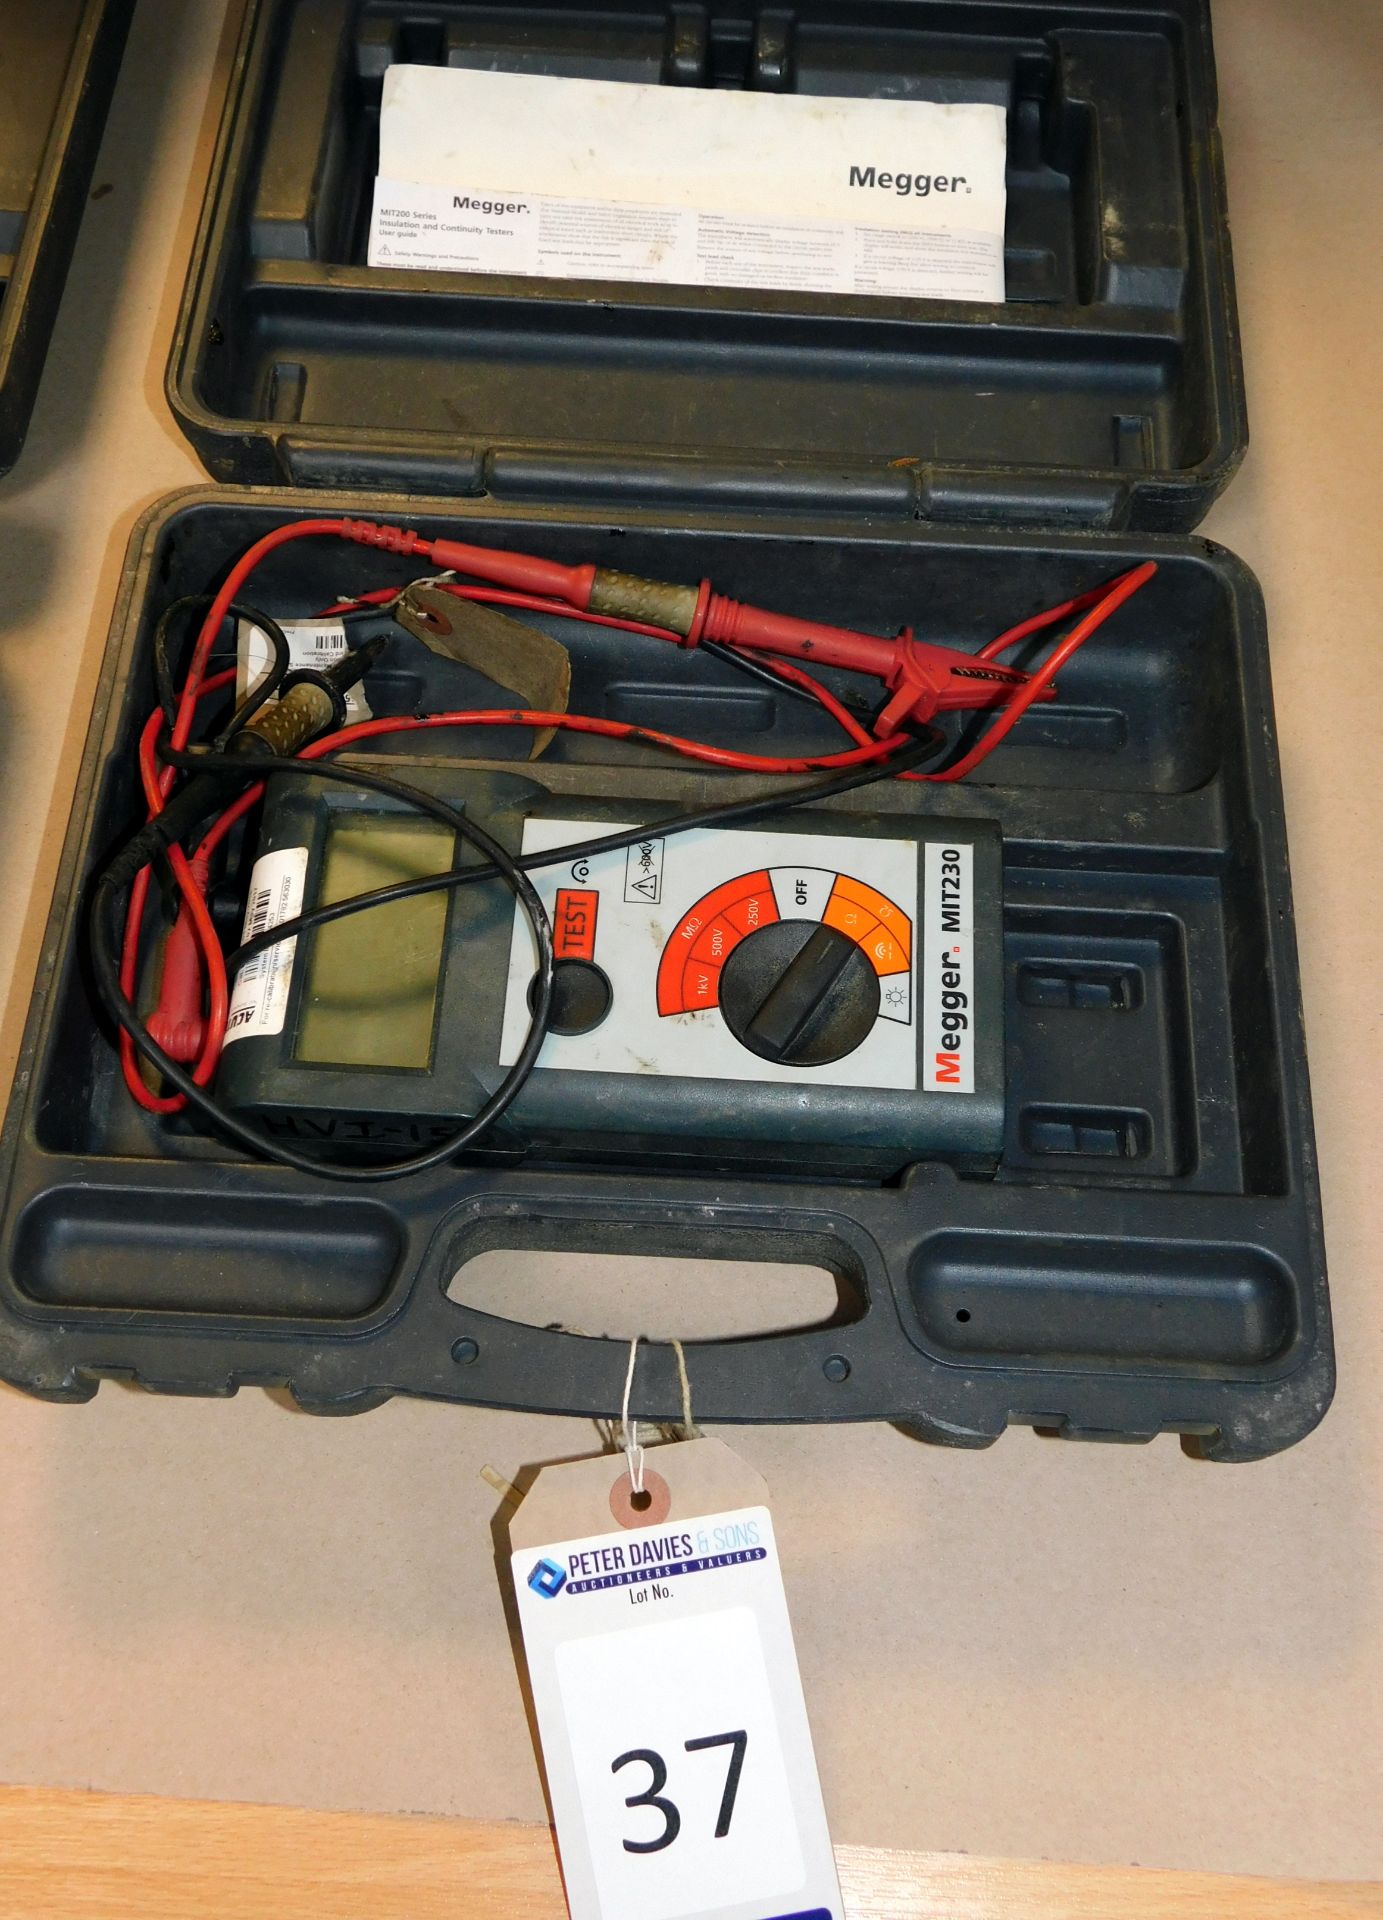 Megger MIT230 Insulation & Continuity Tester